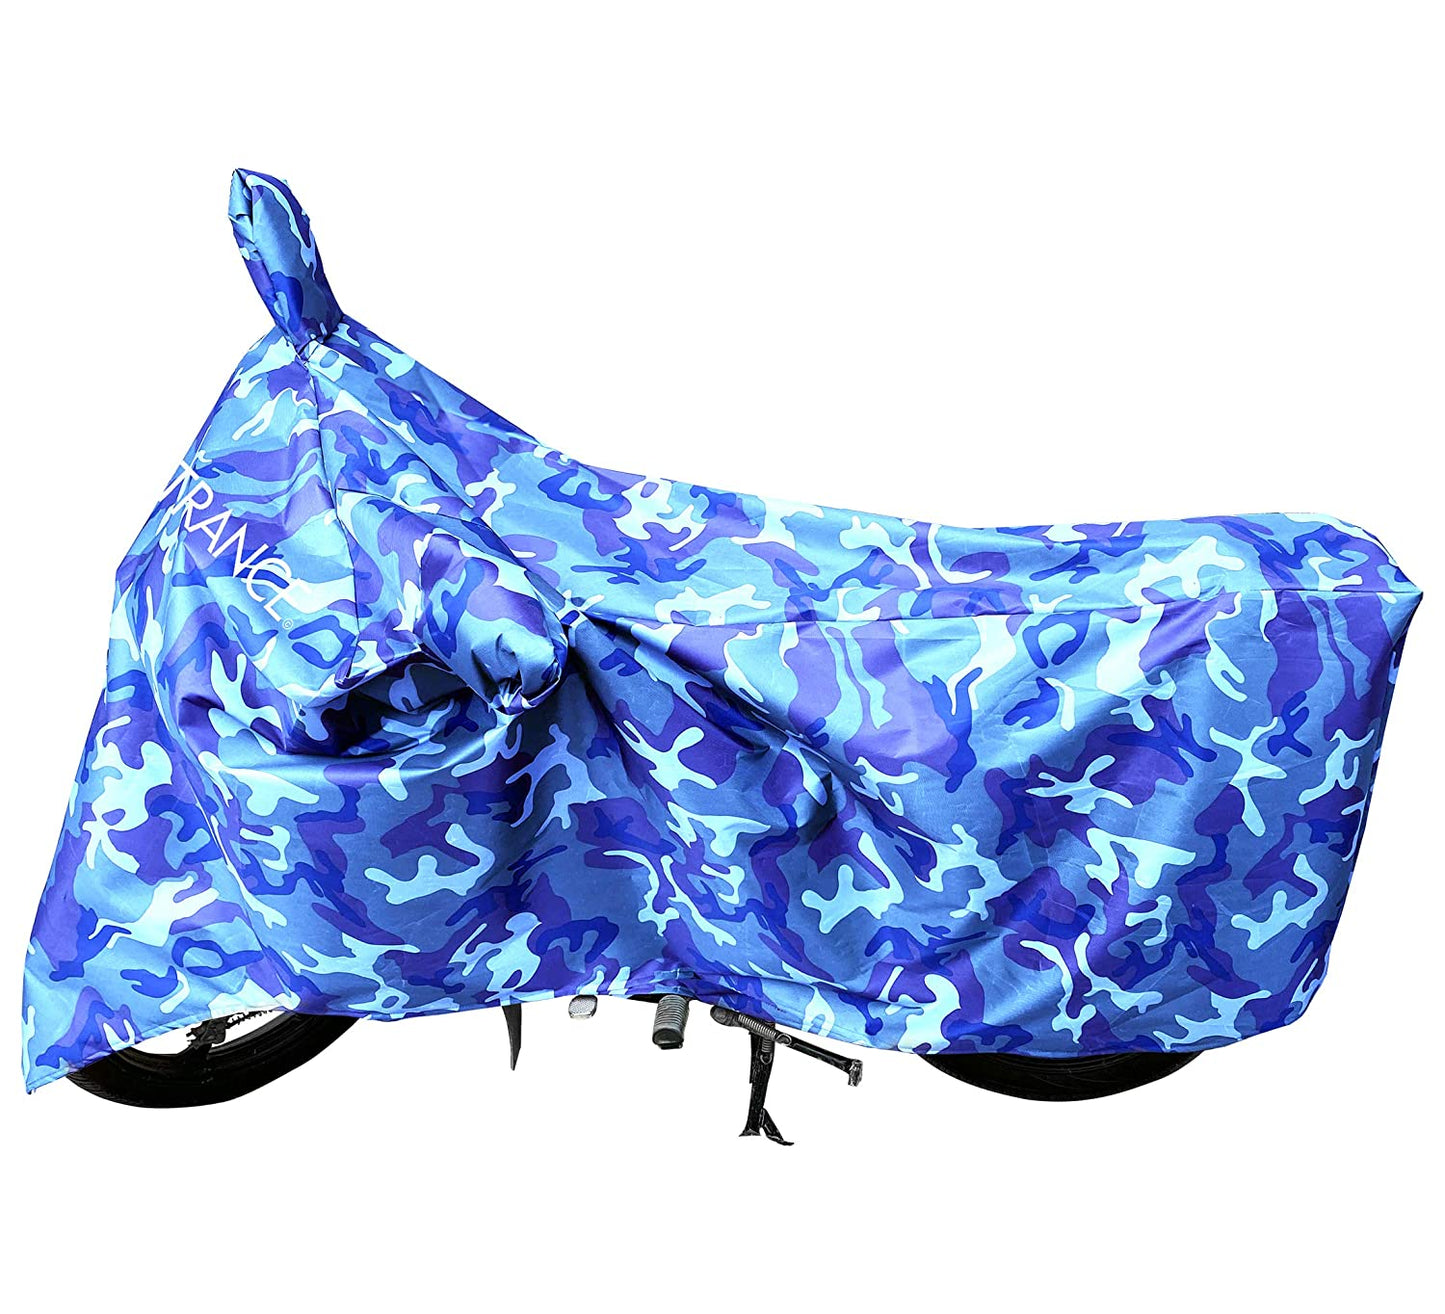 MotoTrance Jungle Bike Body Covers For VespaÂ  ZX 125 2019 - Interlock-Stitched Waterproof and Heat Resistant with Mirror Pockets